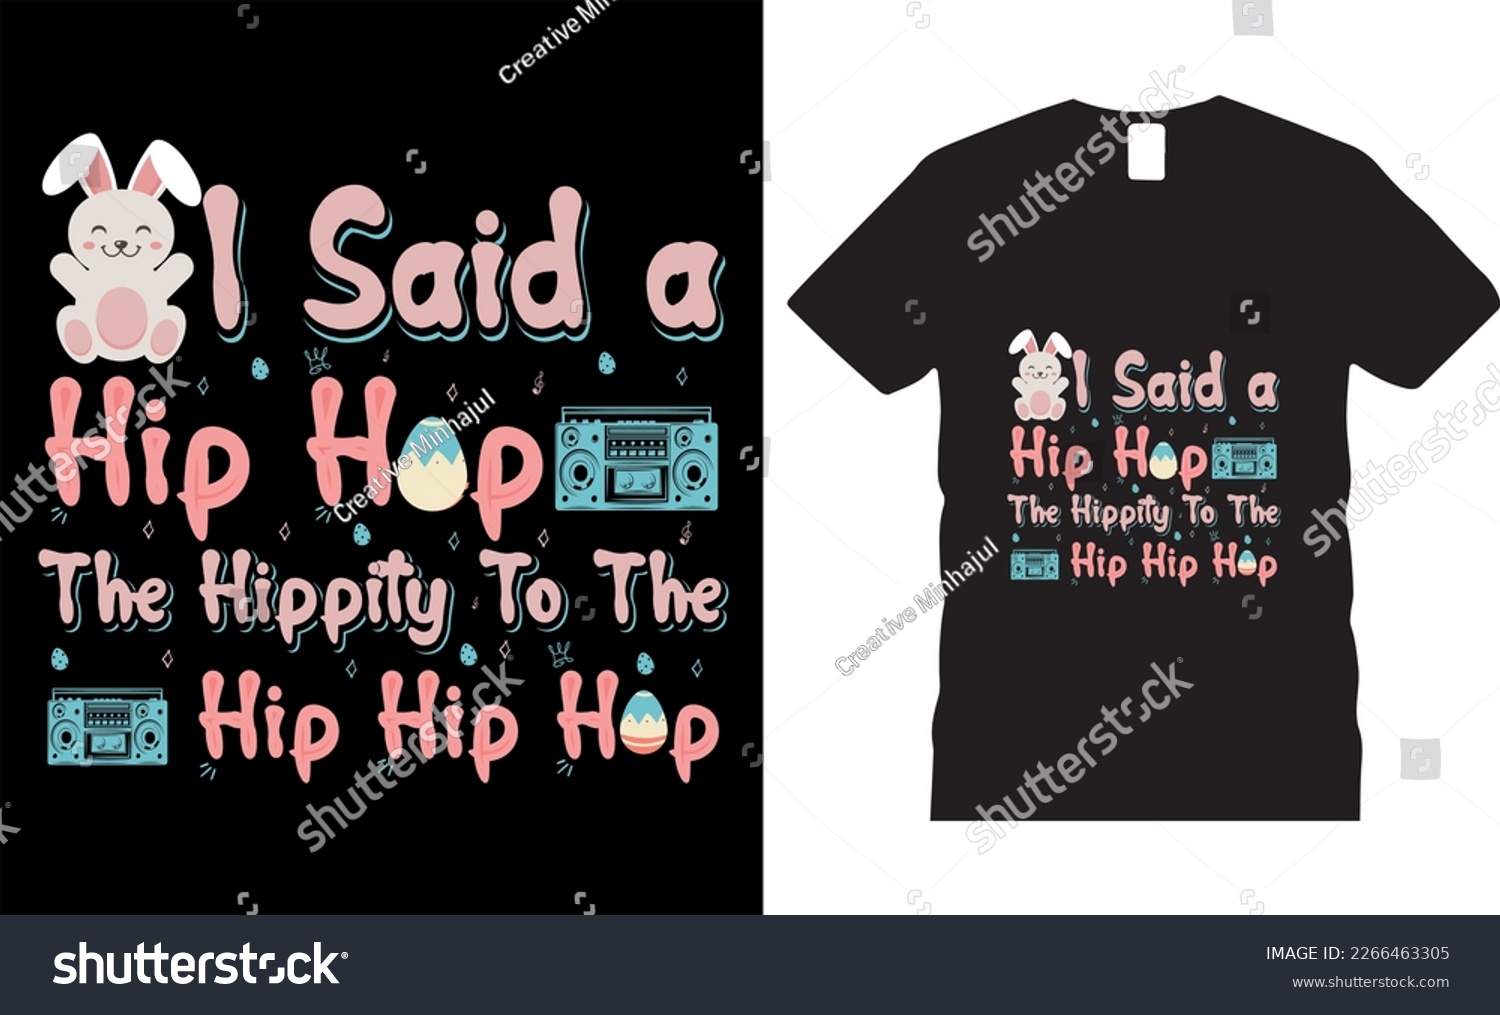 SVG of Happy easter rabbit, bunny tshirt vector design template. I said a hip hop the hippity to the hip hip hop  t-shirt design.Ready to print for apparel, poster, mug and greeting plate illustration. svg